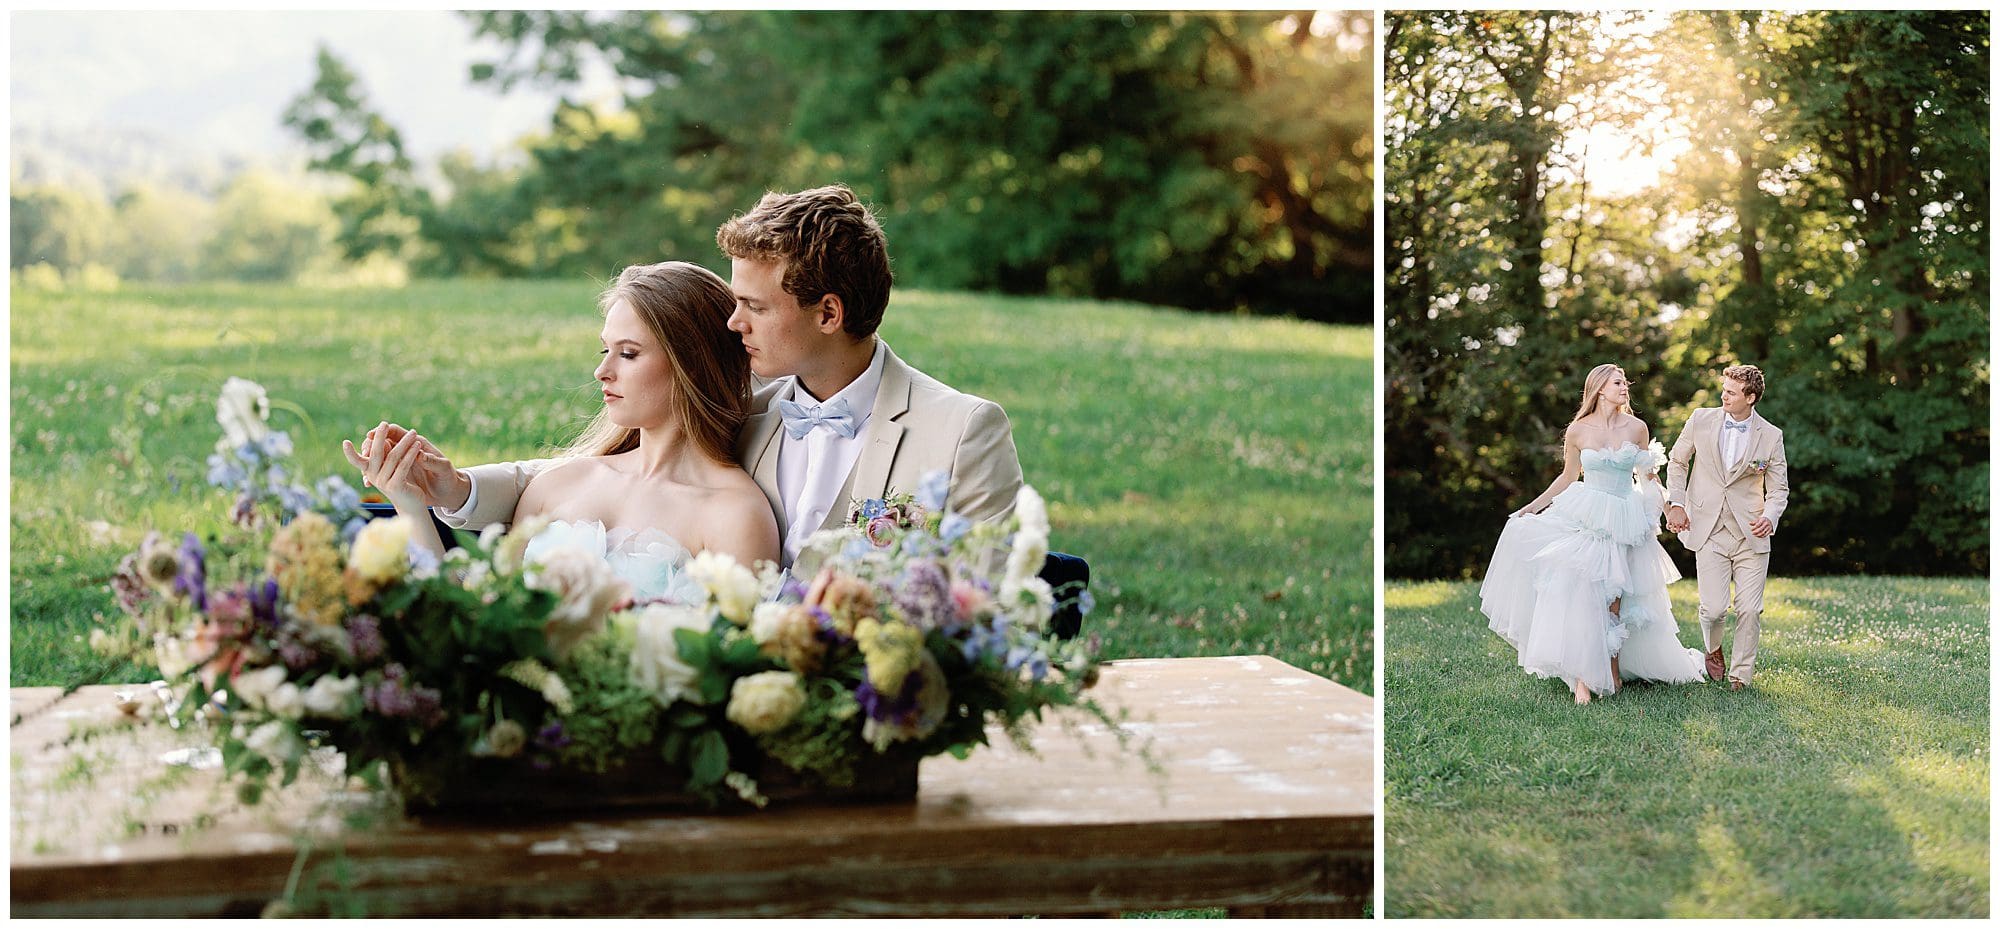 A Parisian-inspired summer wedding at The Ridge, with a bride and groom sitting on a table in a field.